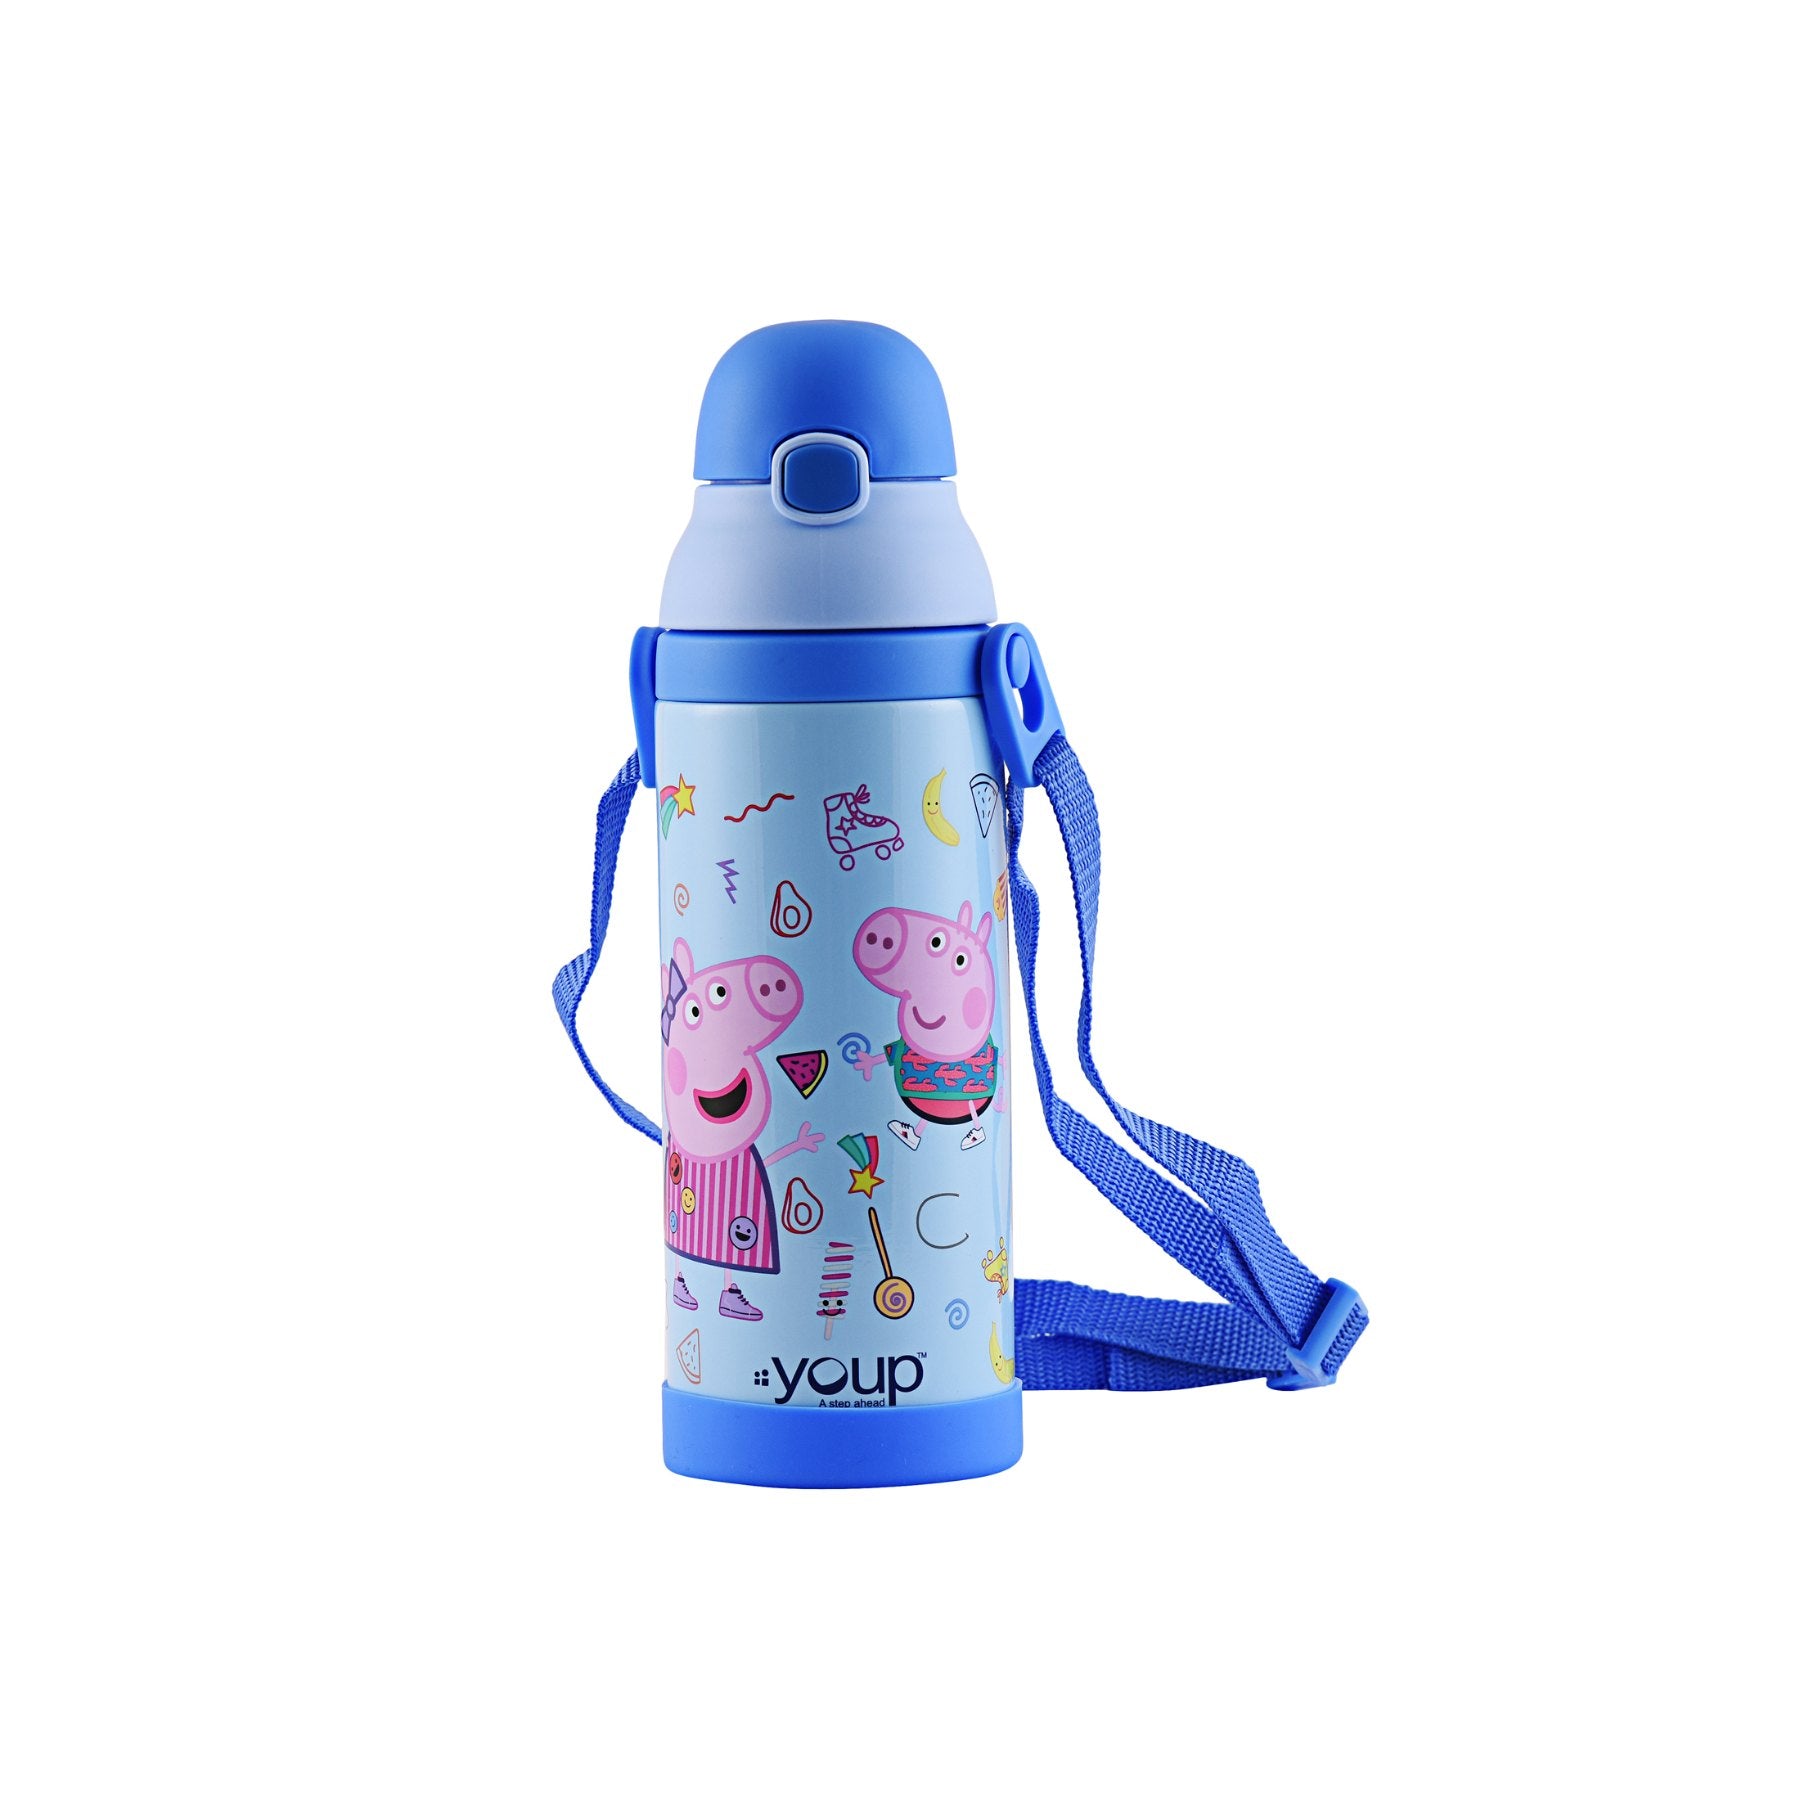 Youp Stainless Steel Insulated Blue Color Peppa Pig Kids Sipper Bottle Logan - 500 Ml